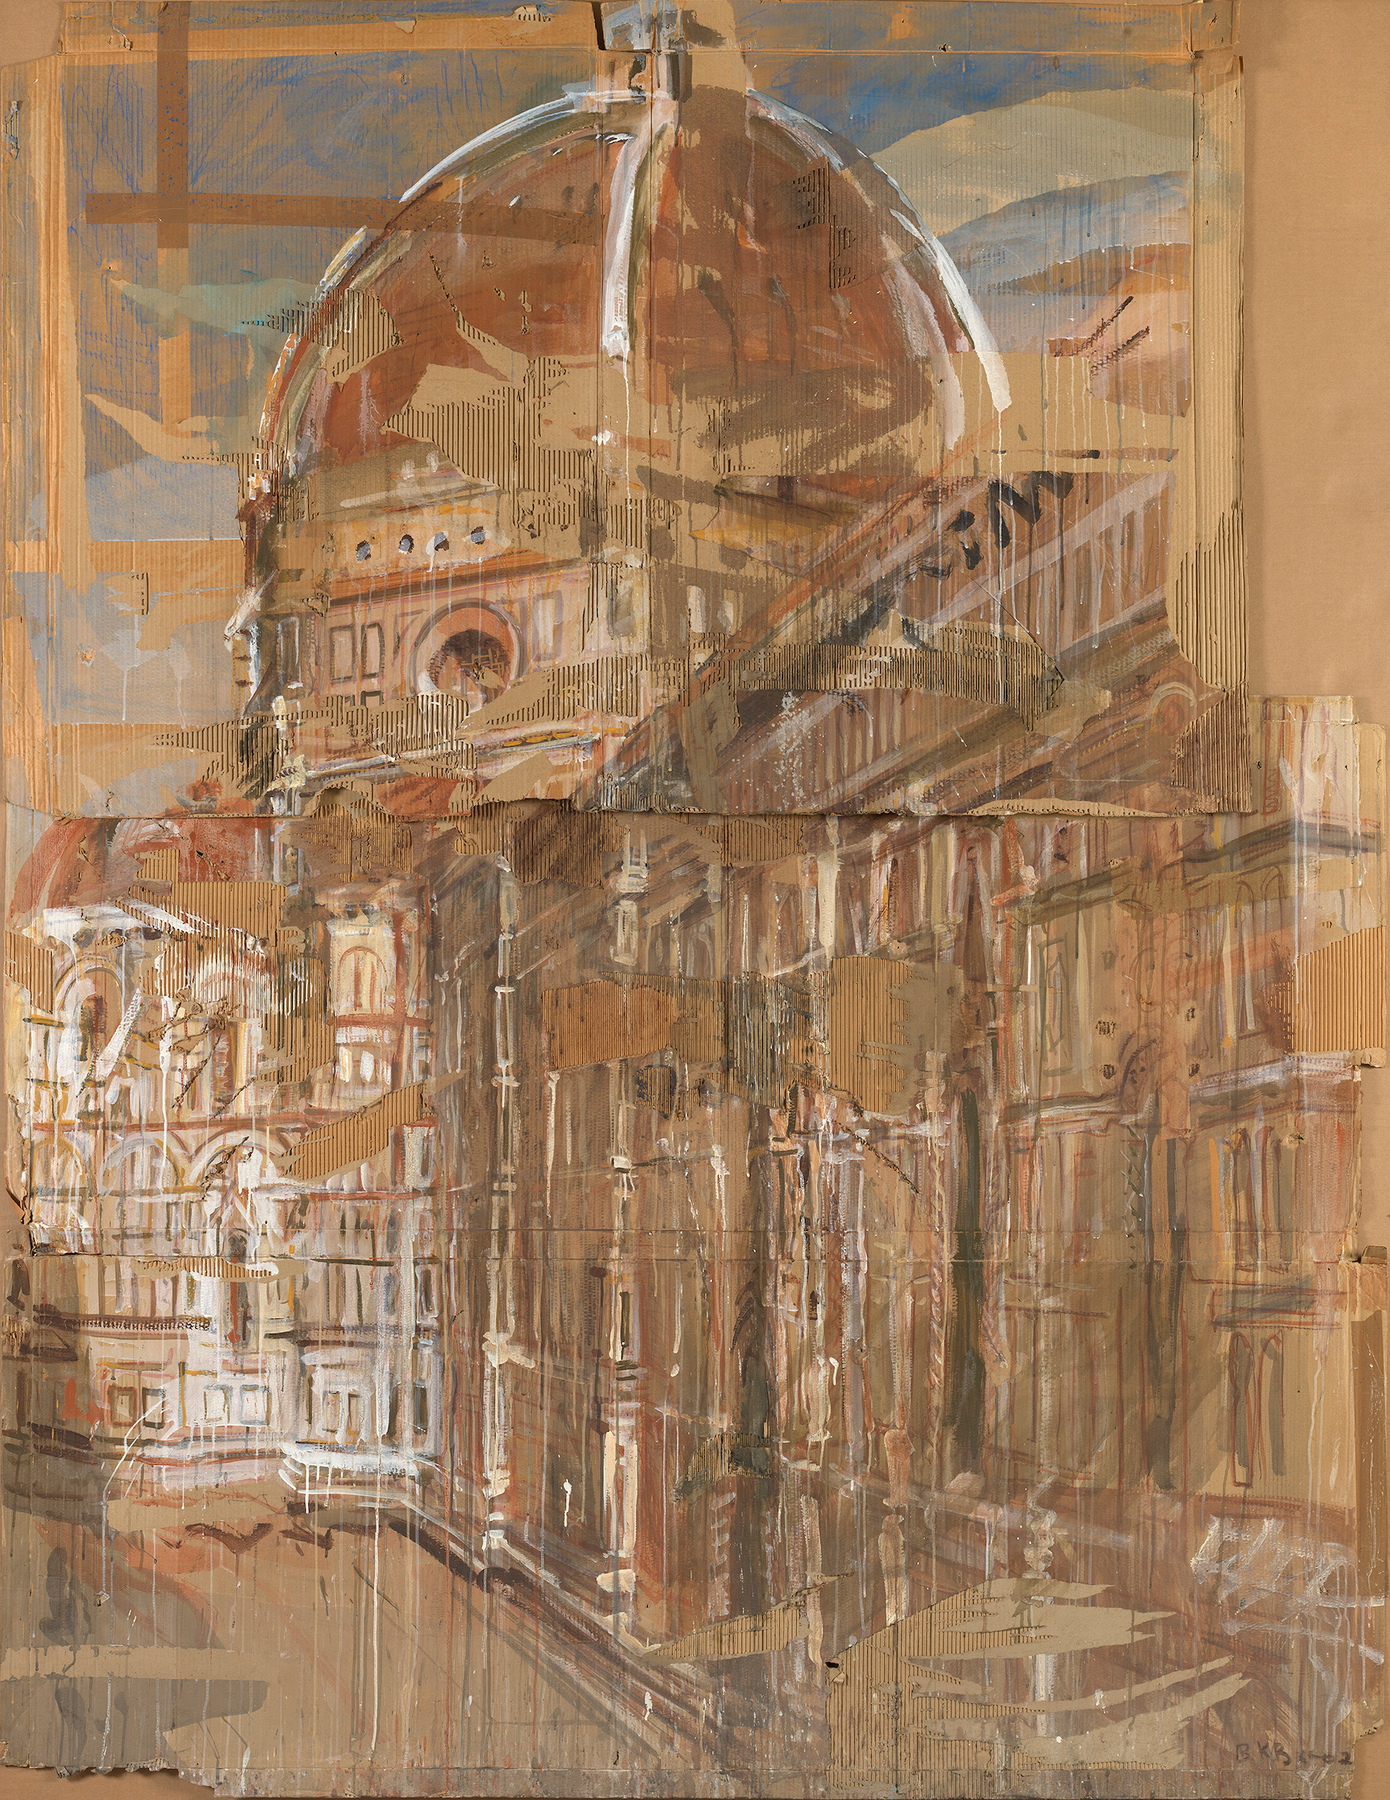 <a href='/en/catalogue/view?id=15453'>Lot</a> KOSHLYAKOV, VALERY, <i>The Duomo, Florence Cathedral</i><br> 20,000-30,000 GBP.